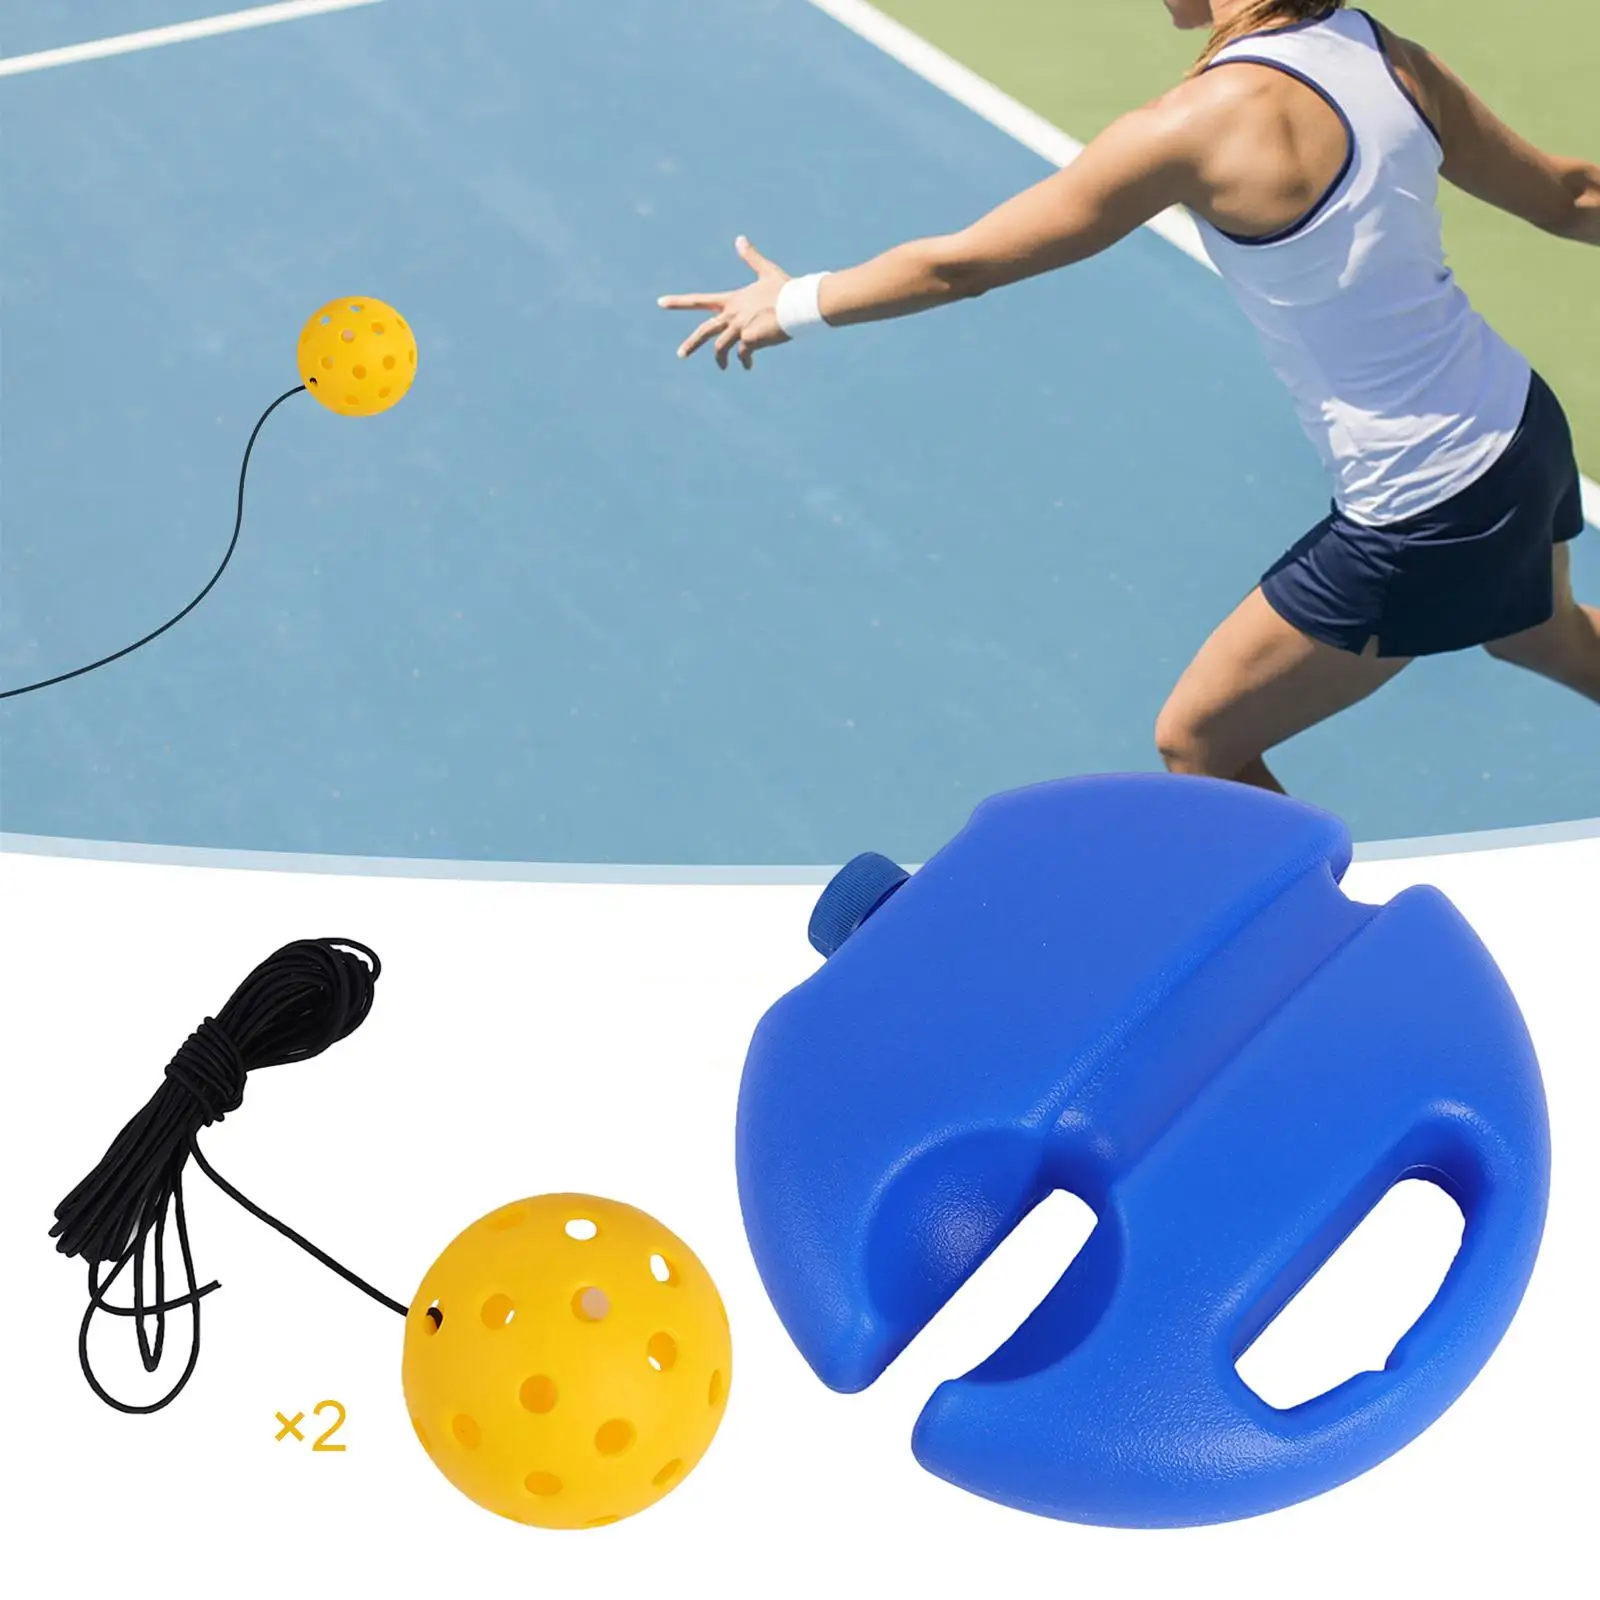 Pickleball Trainer Indoor Outdoor Accessory for Exercise Training Sport